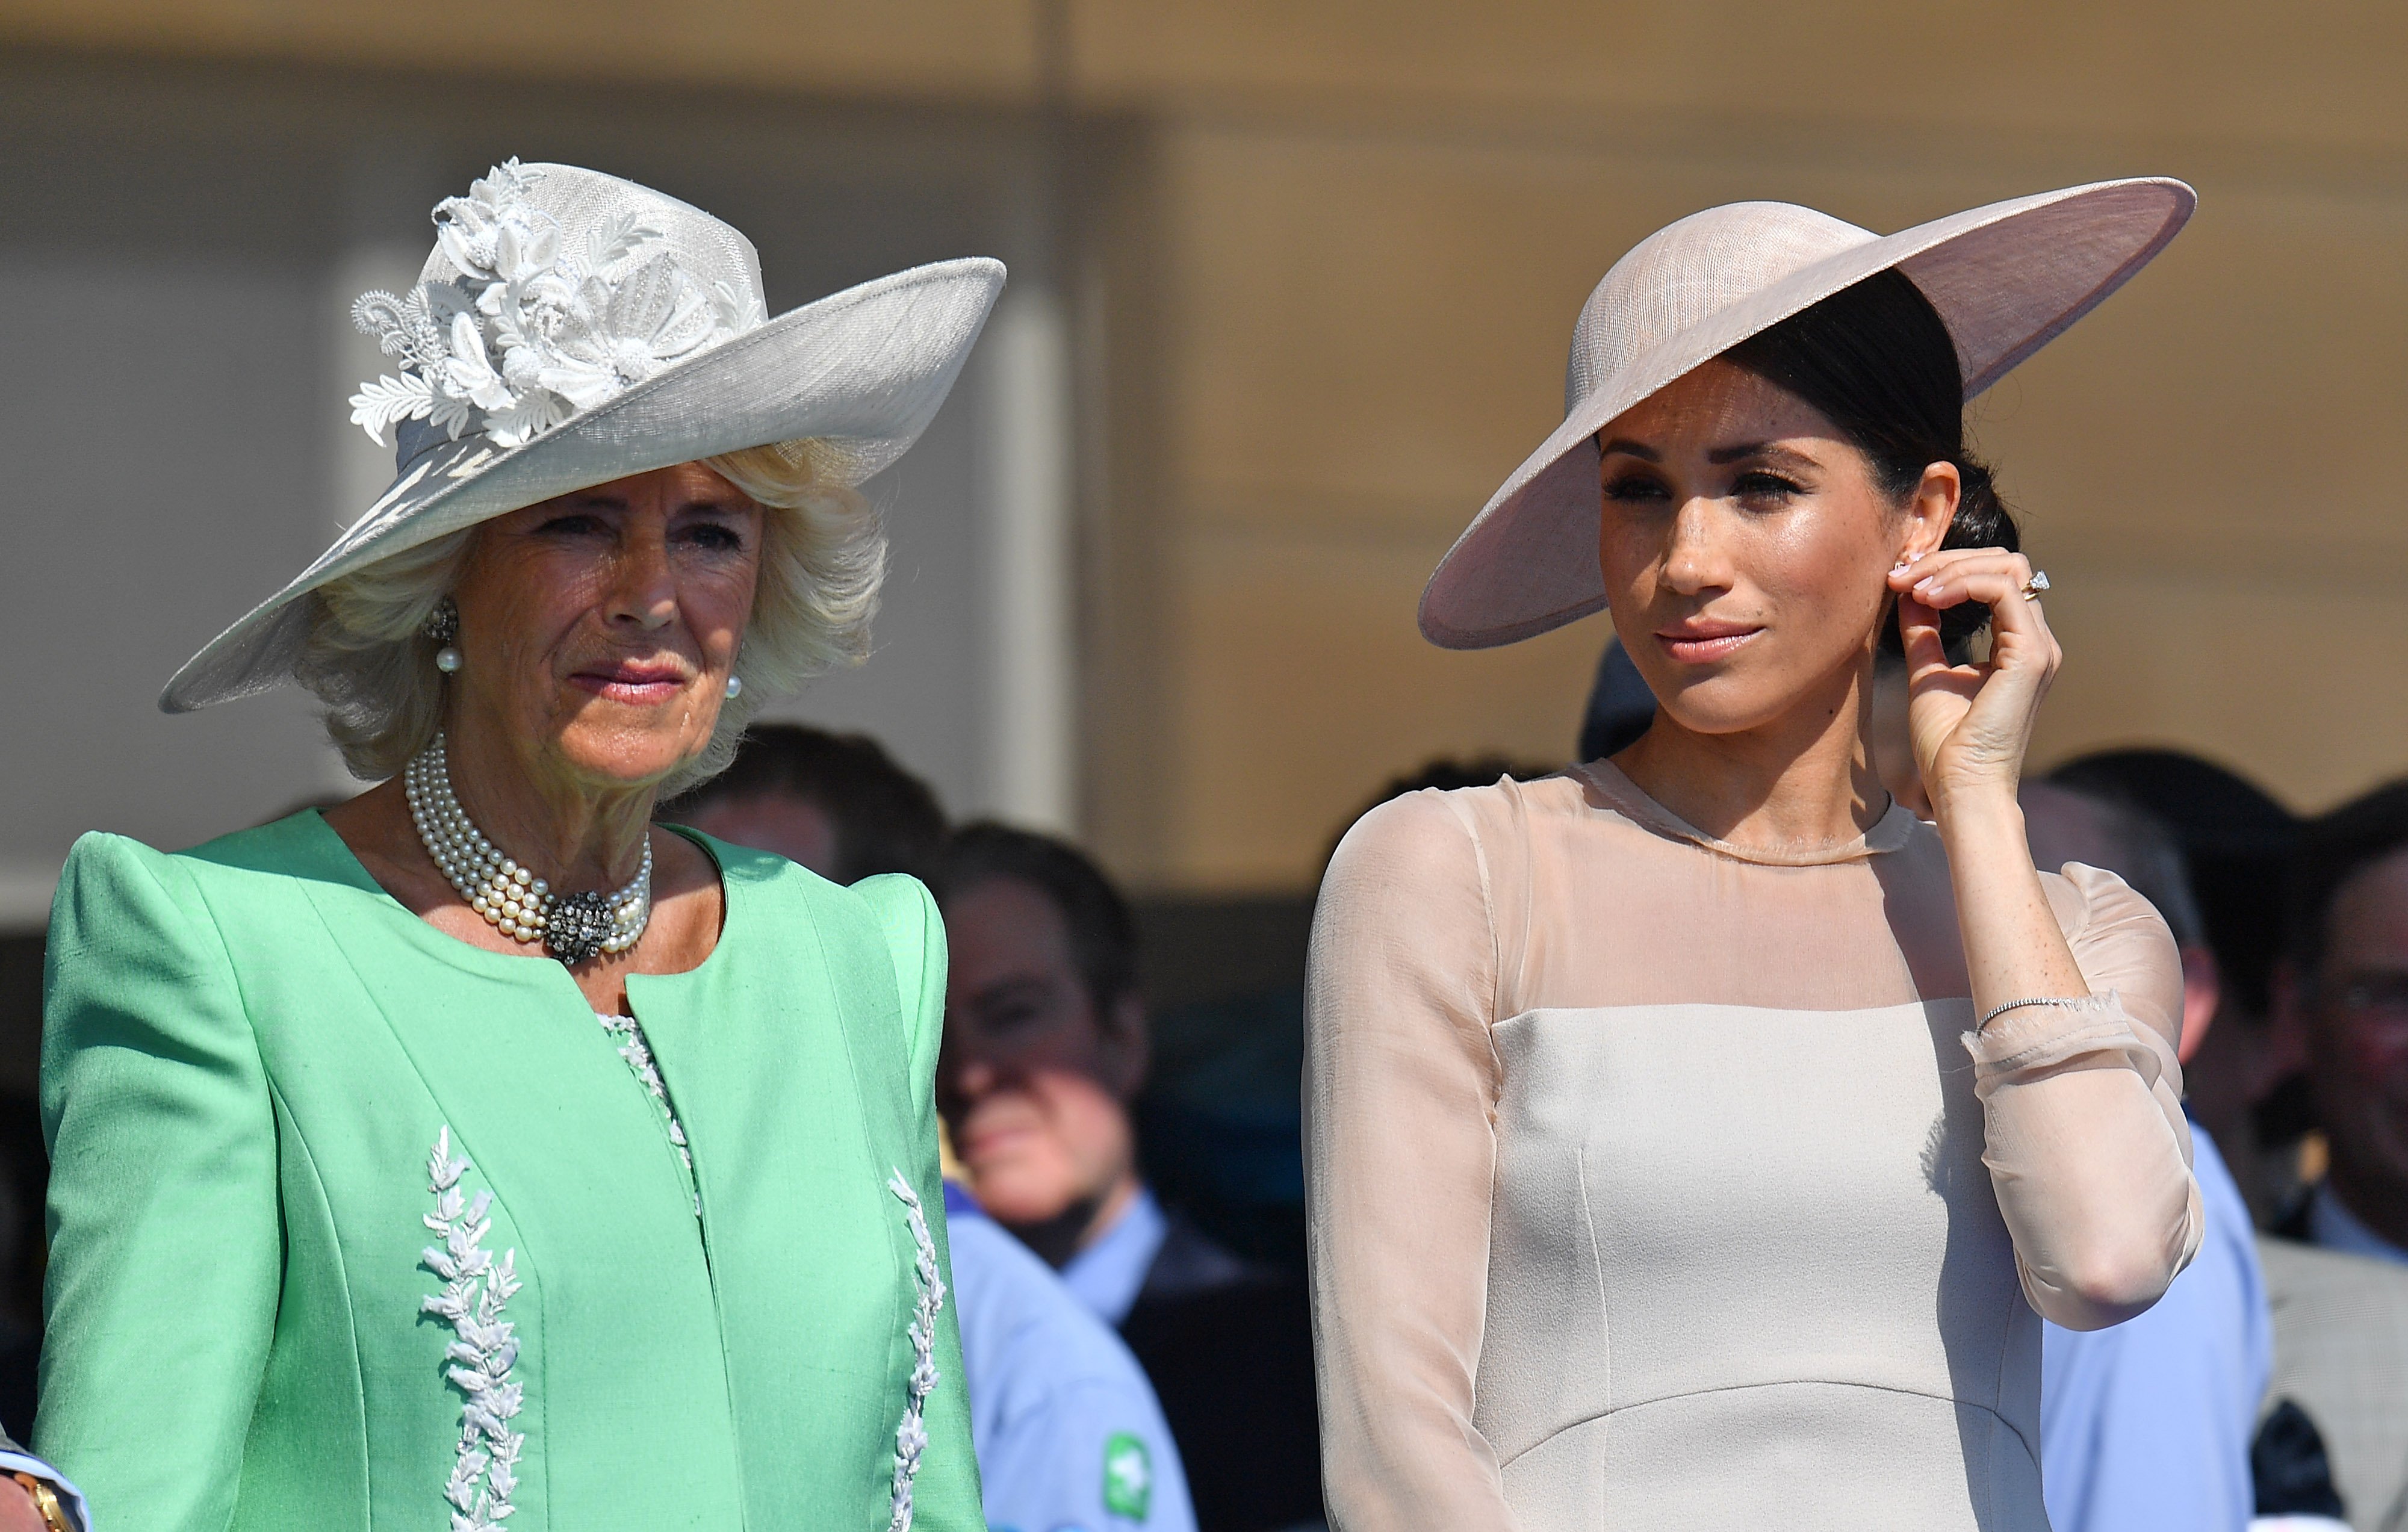 Duchess Camilla and Duchess Meghan at Prince Charles's 70th Birthday Garden Party at Buckingham Palace in London on May 22, 2018. | Source: Dominic Lipinski/AFP/Getty Images